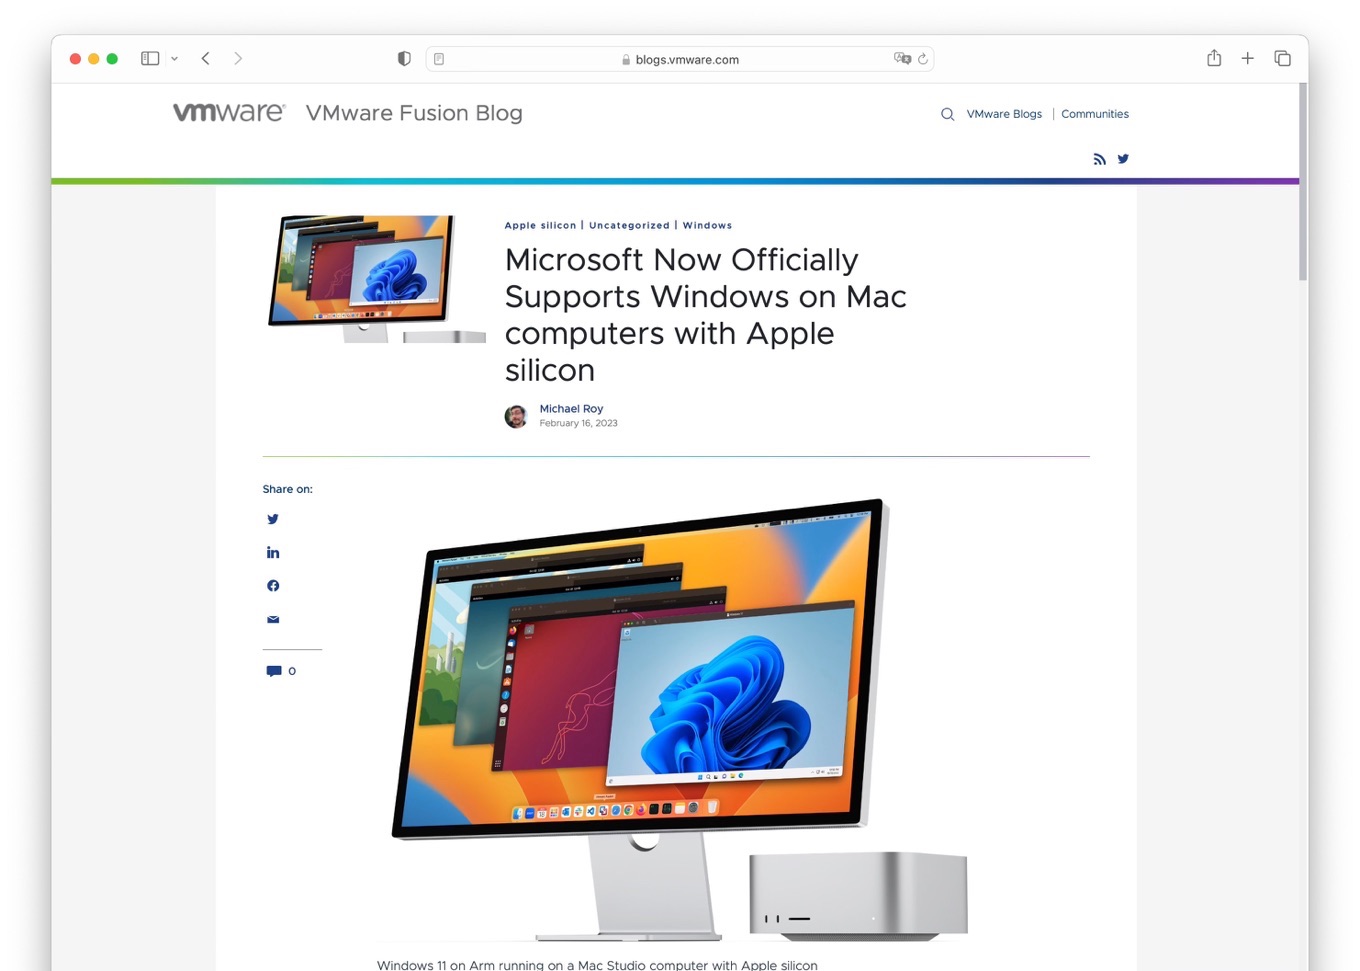 Microsoft Now Officially Supports Windows on Mac computers with Apple silicon